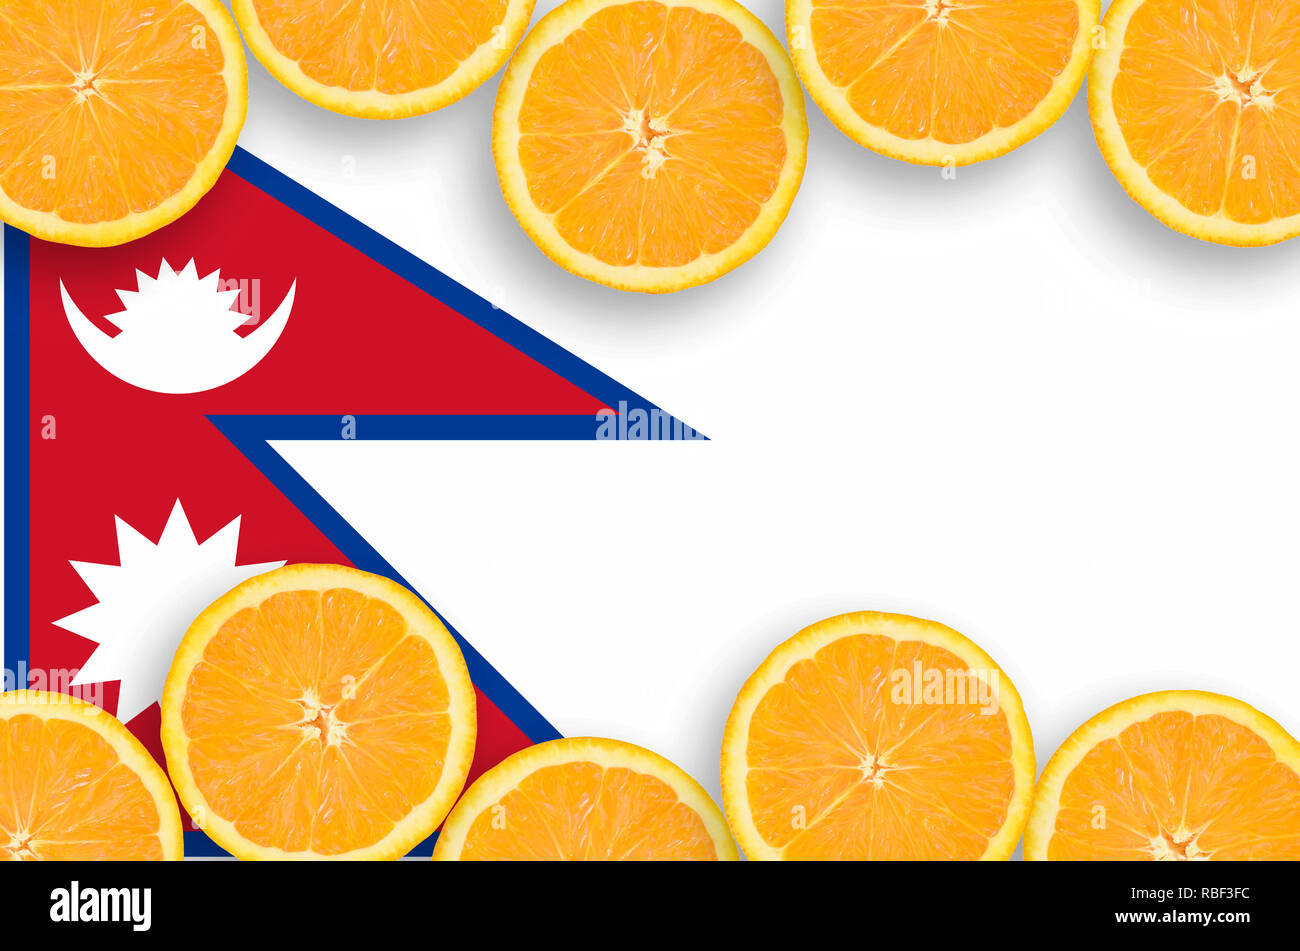 Nepal flag  in horizontal frame of orange citrus fruit slices. Concept of growing as well as import and export of citrus fruits Stock Photo